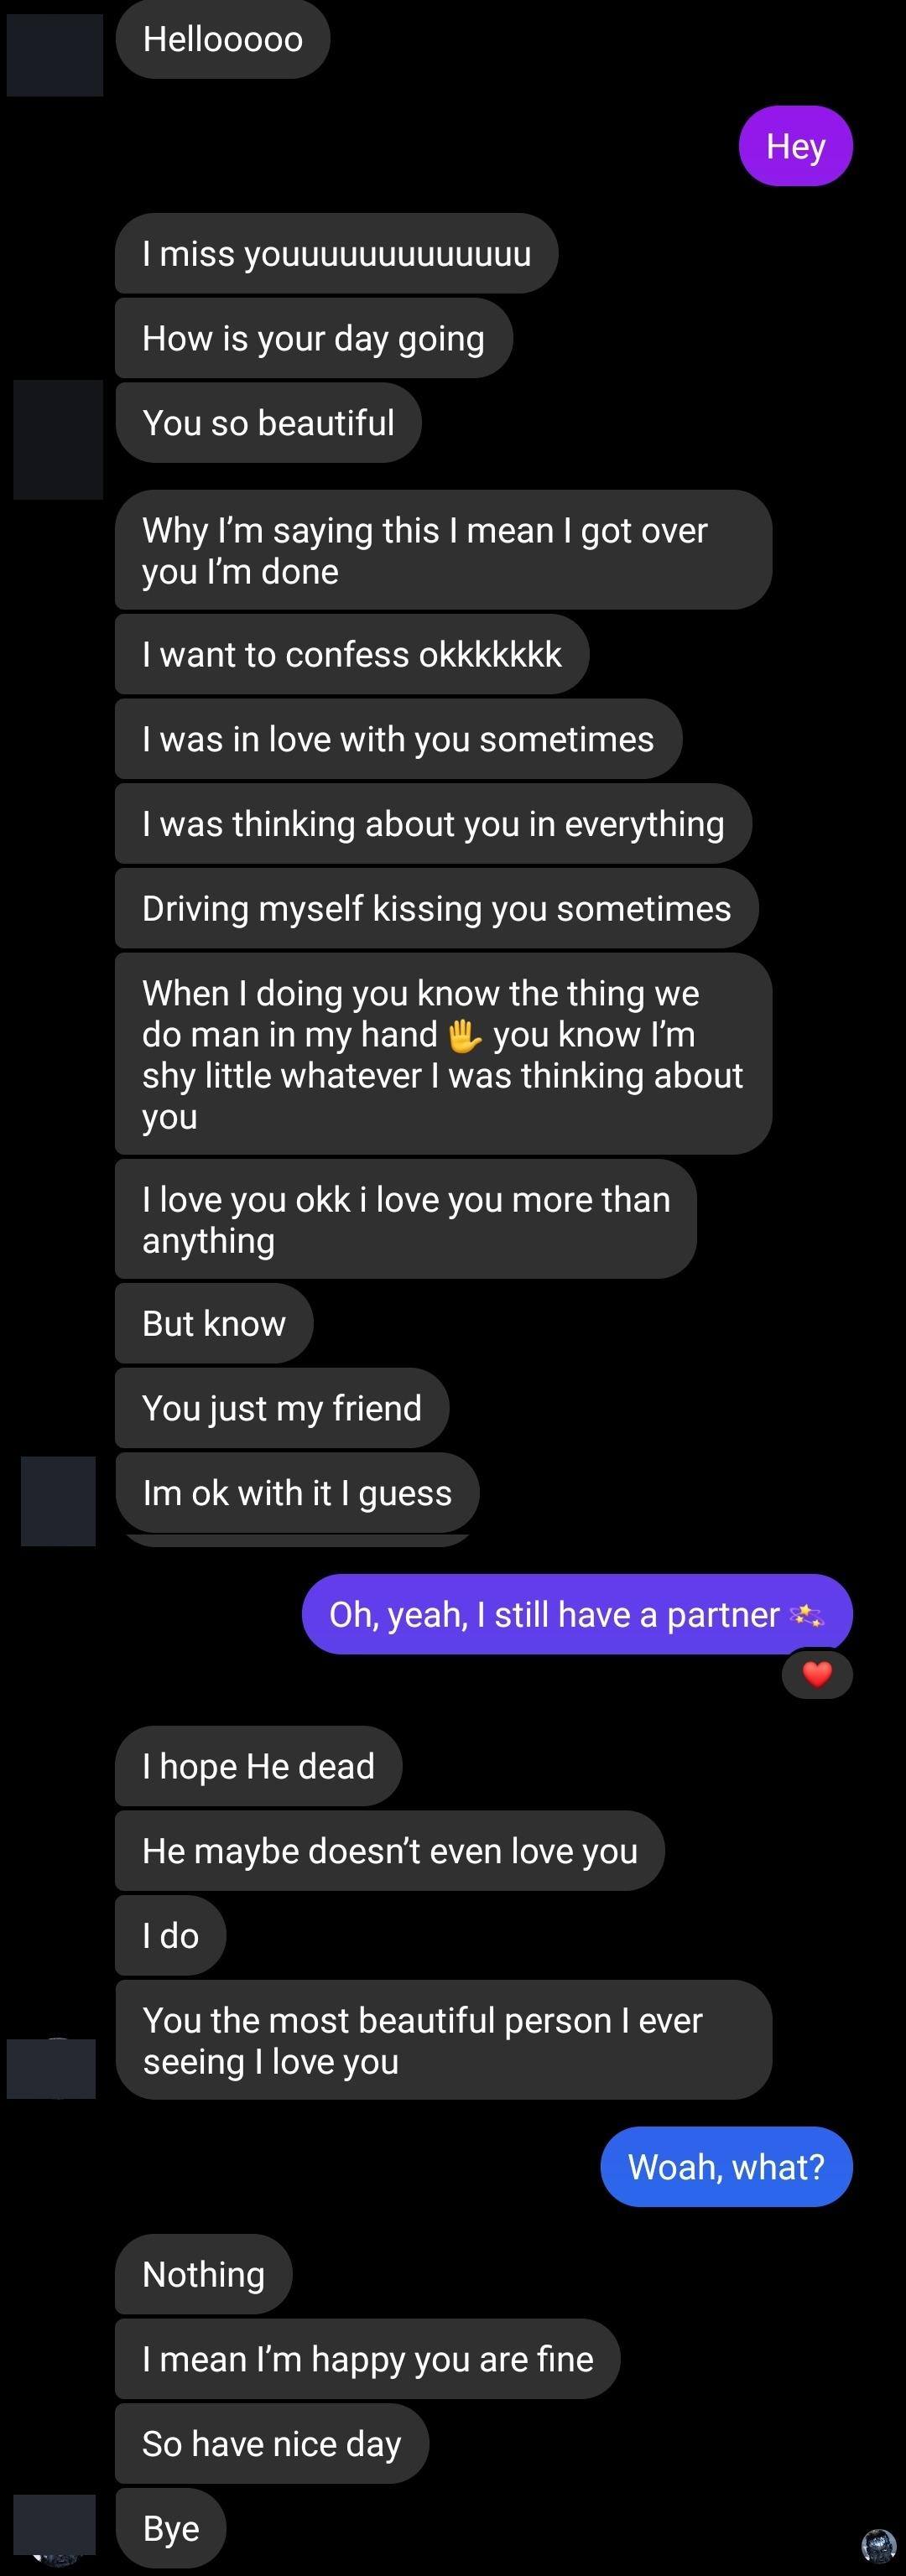 man keeps sending messages and wishing the girl&#x27;s partner to be dead